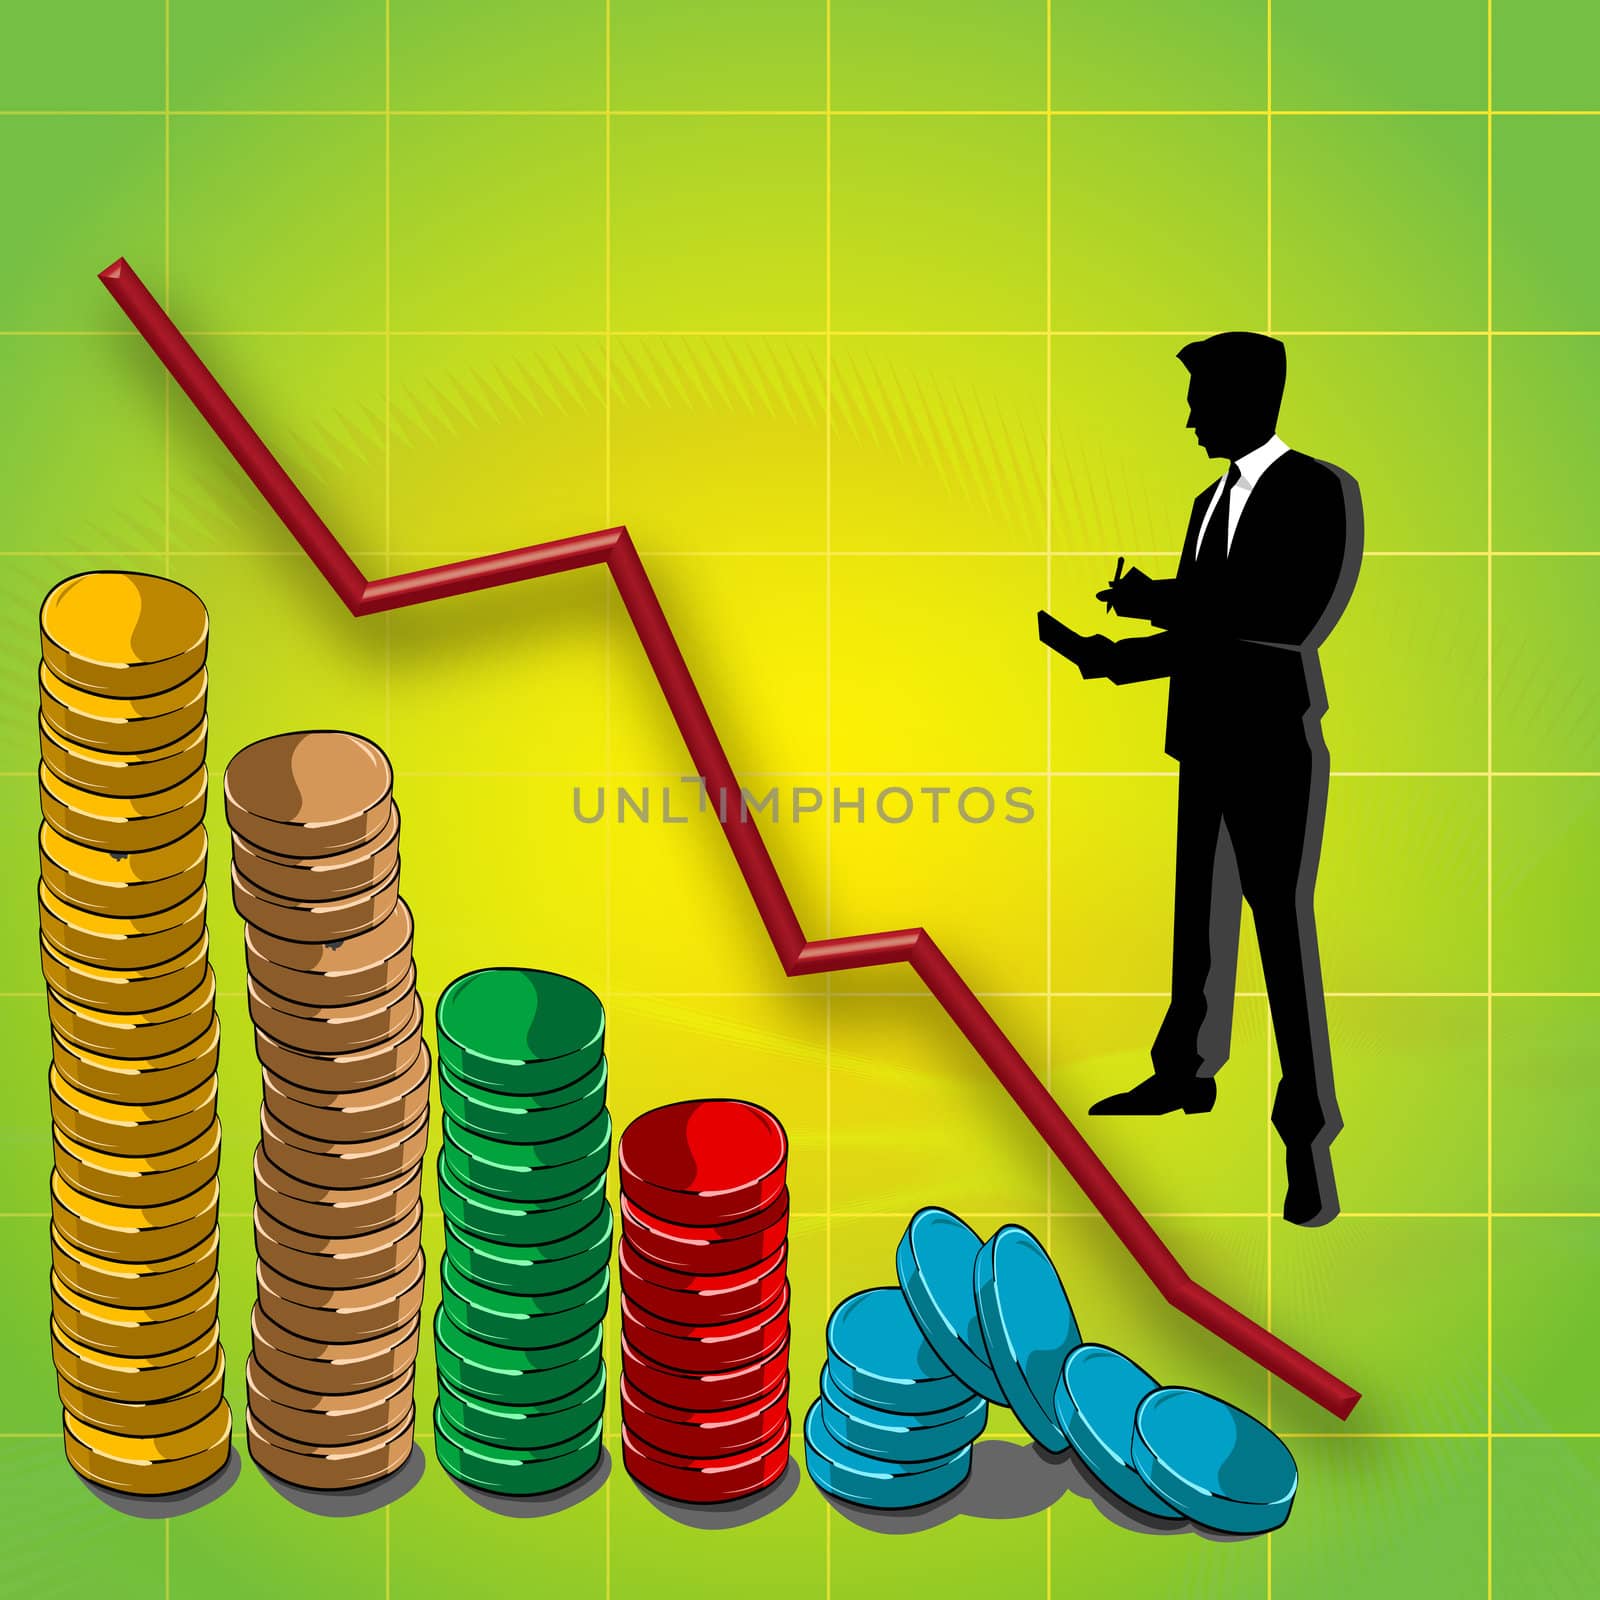 graphline and bar graph of coins, business man silhouette 
